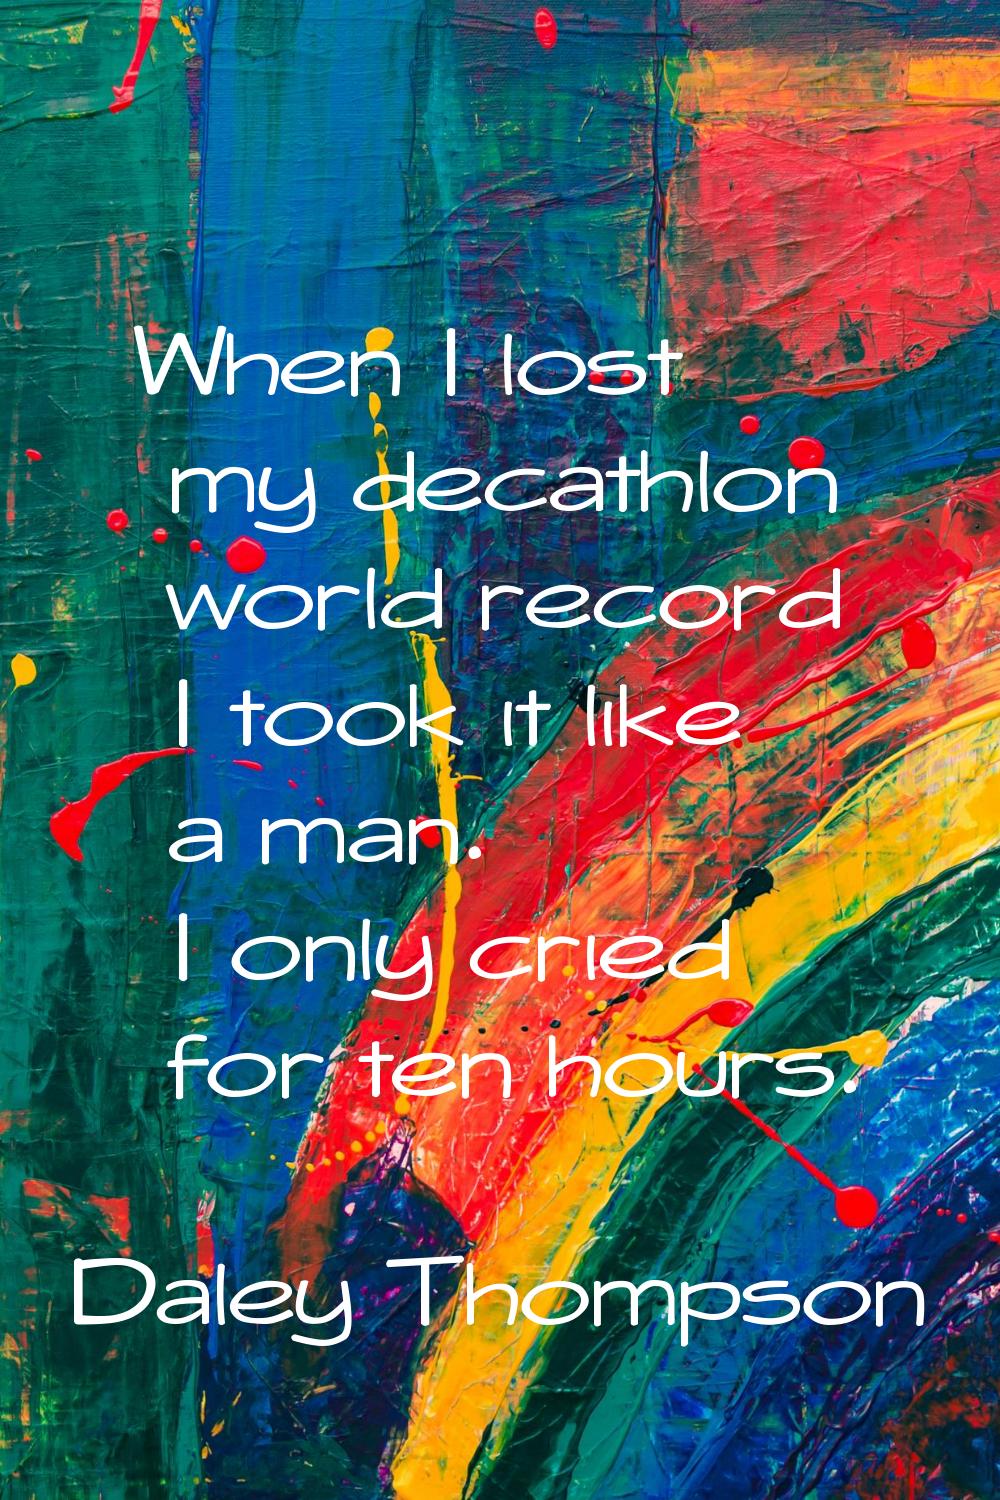 When I lost my decathlon world record I took it like a man. I only cried for ten hours.